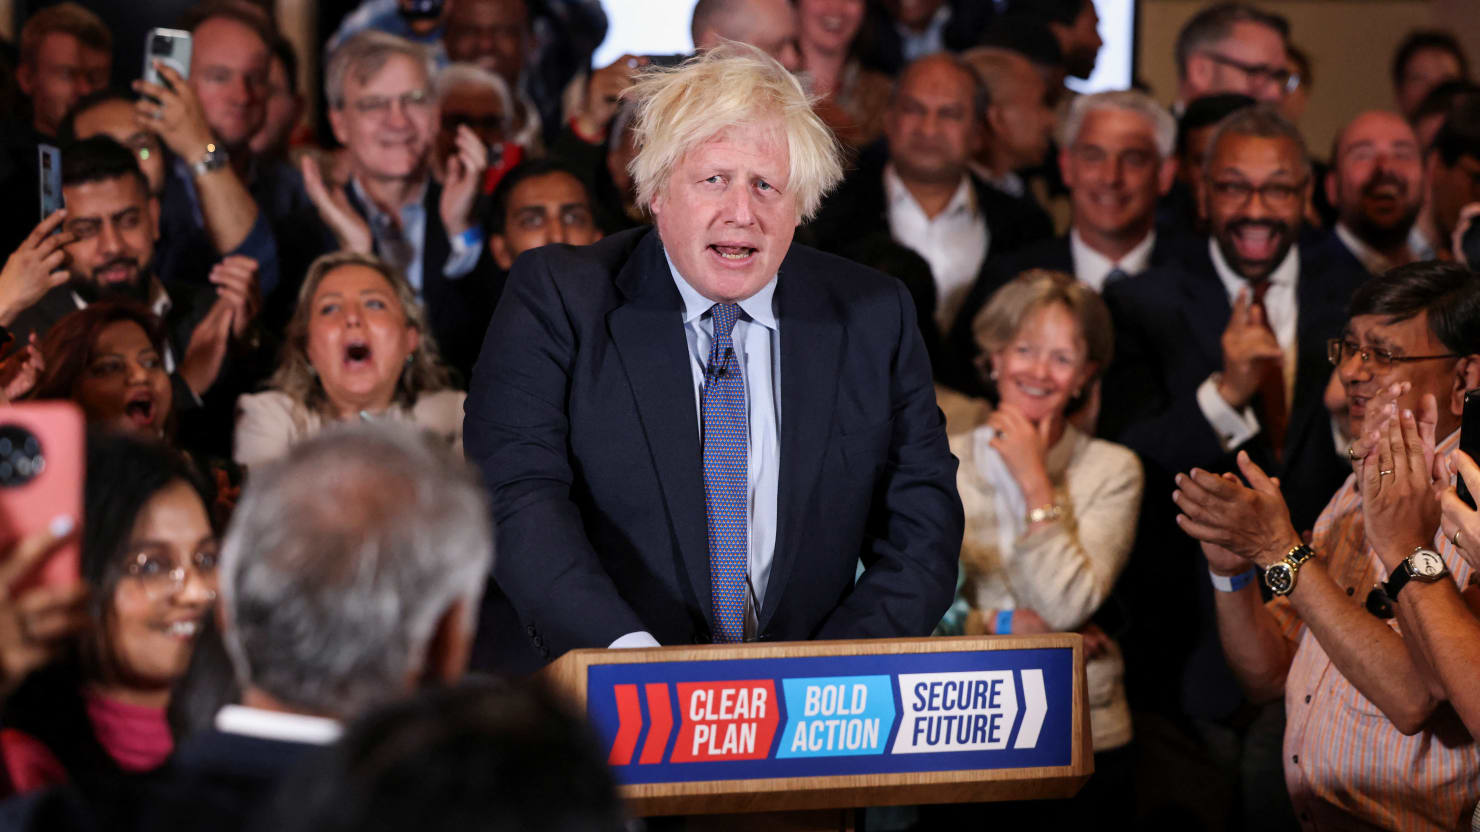 Boris Johnson delivers dramatic speech to boost Conservative support in UK